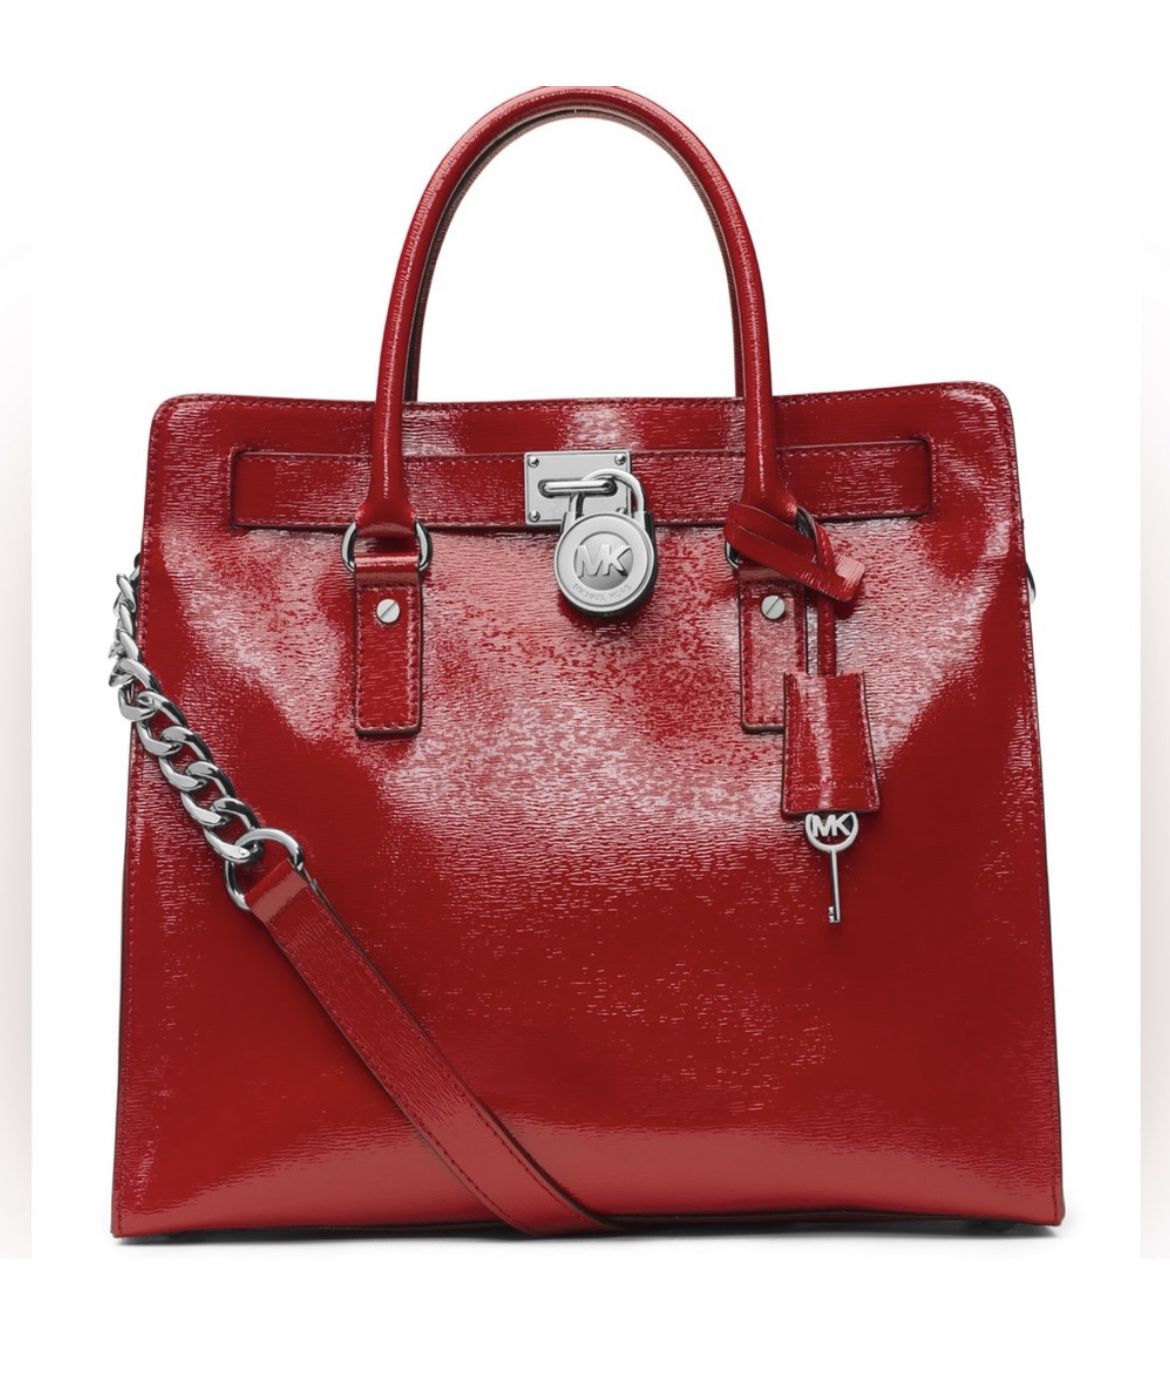 Michael Kors Hamilton tote - scarlet red - patent leather - large for